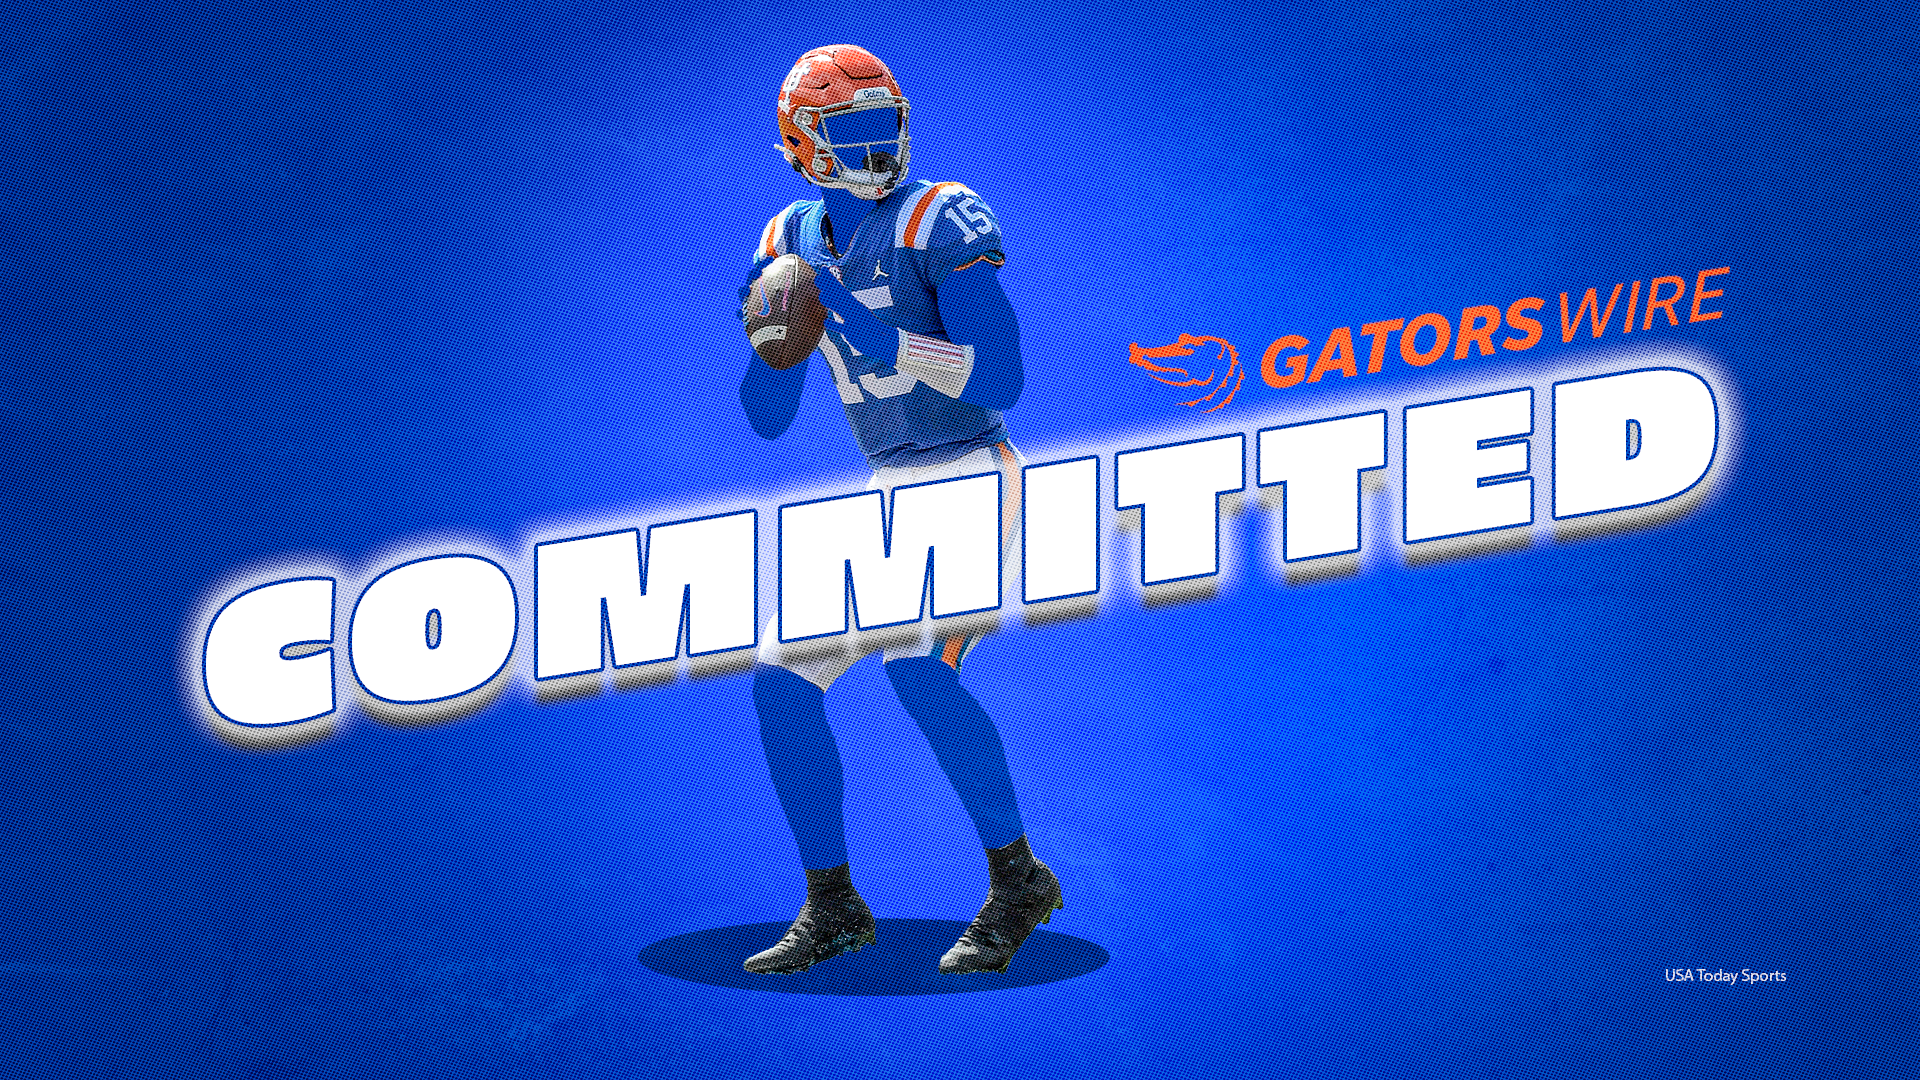 florida lands commitment from 4-star peach state iol